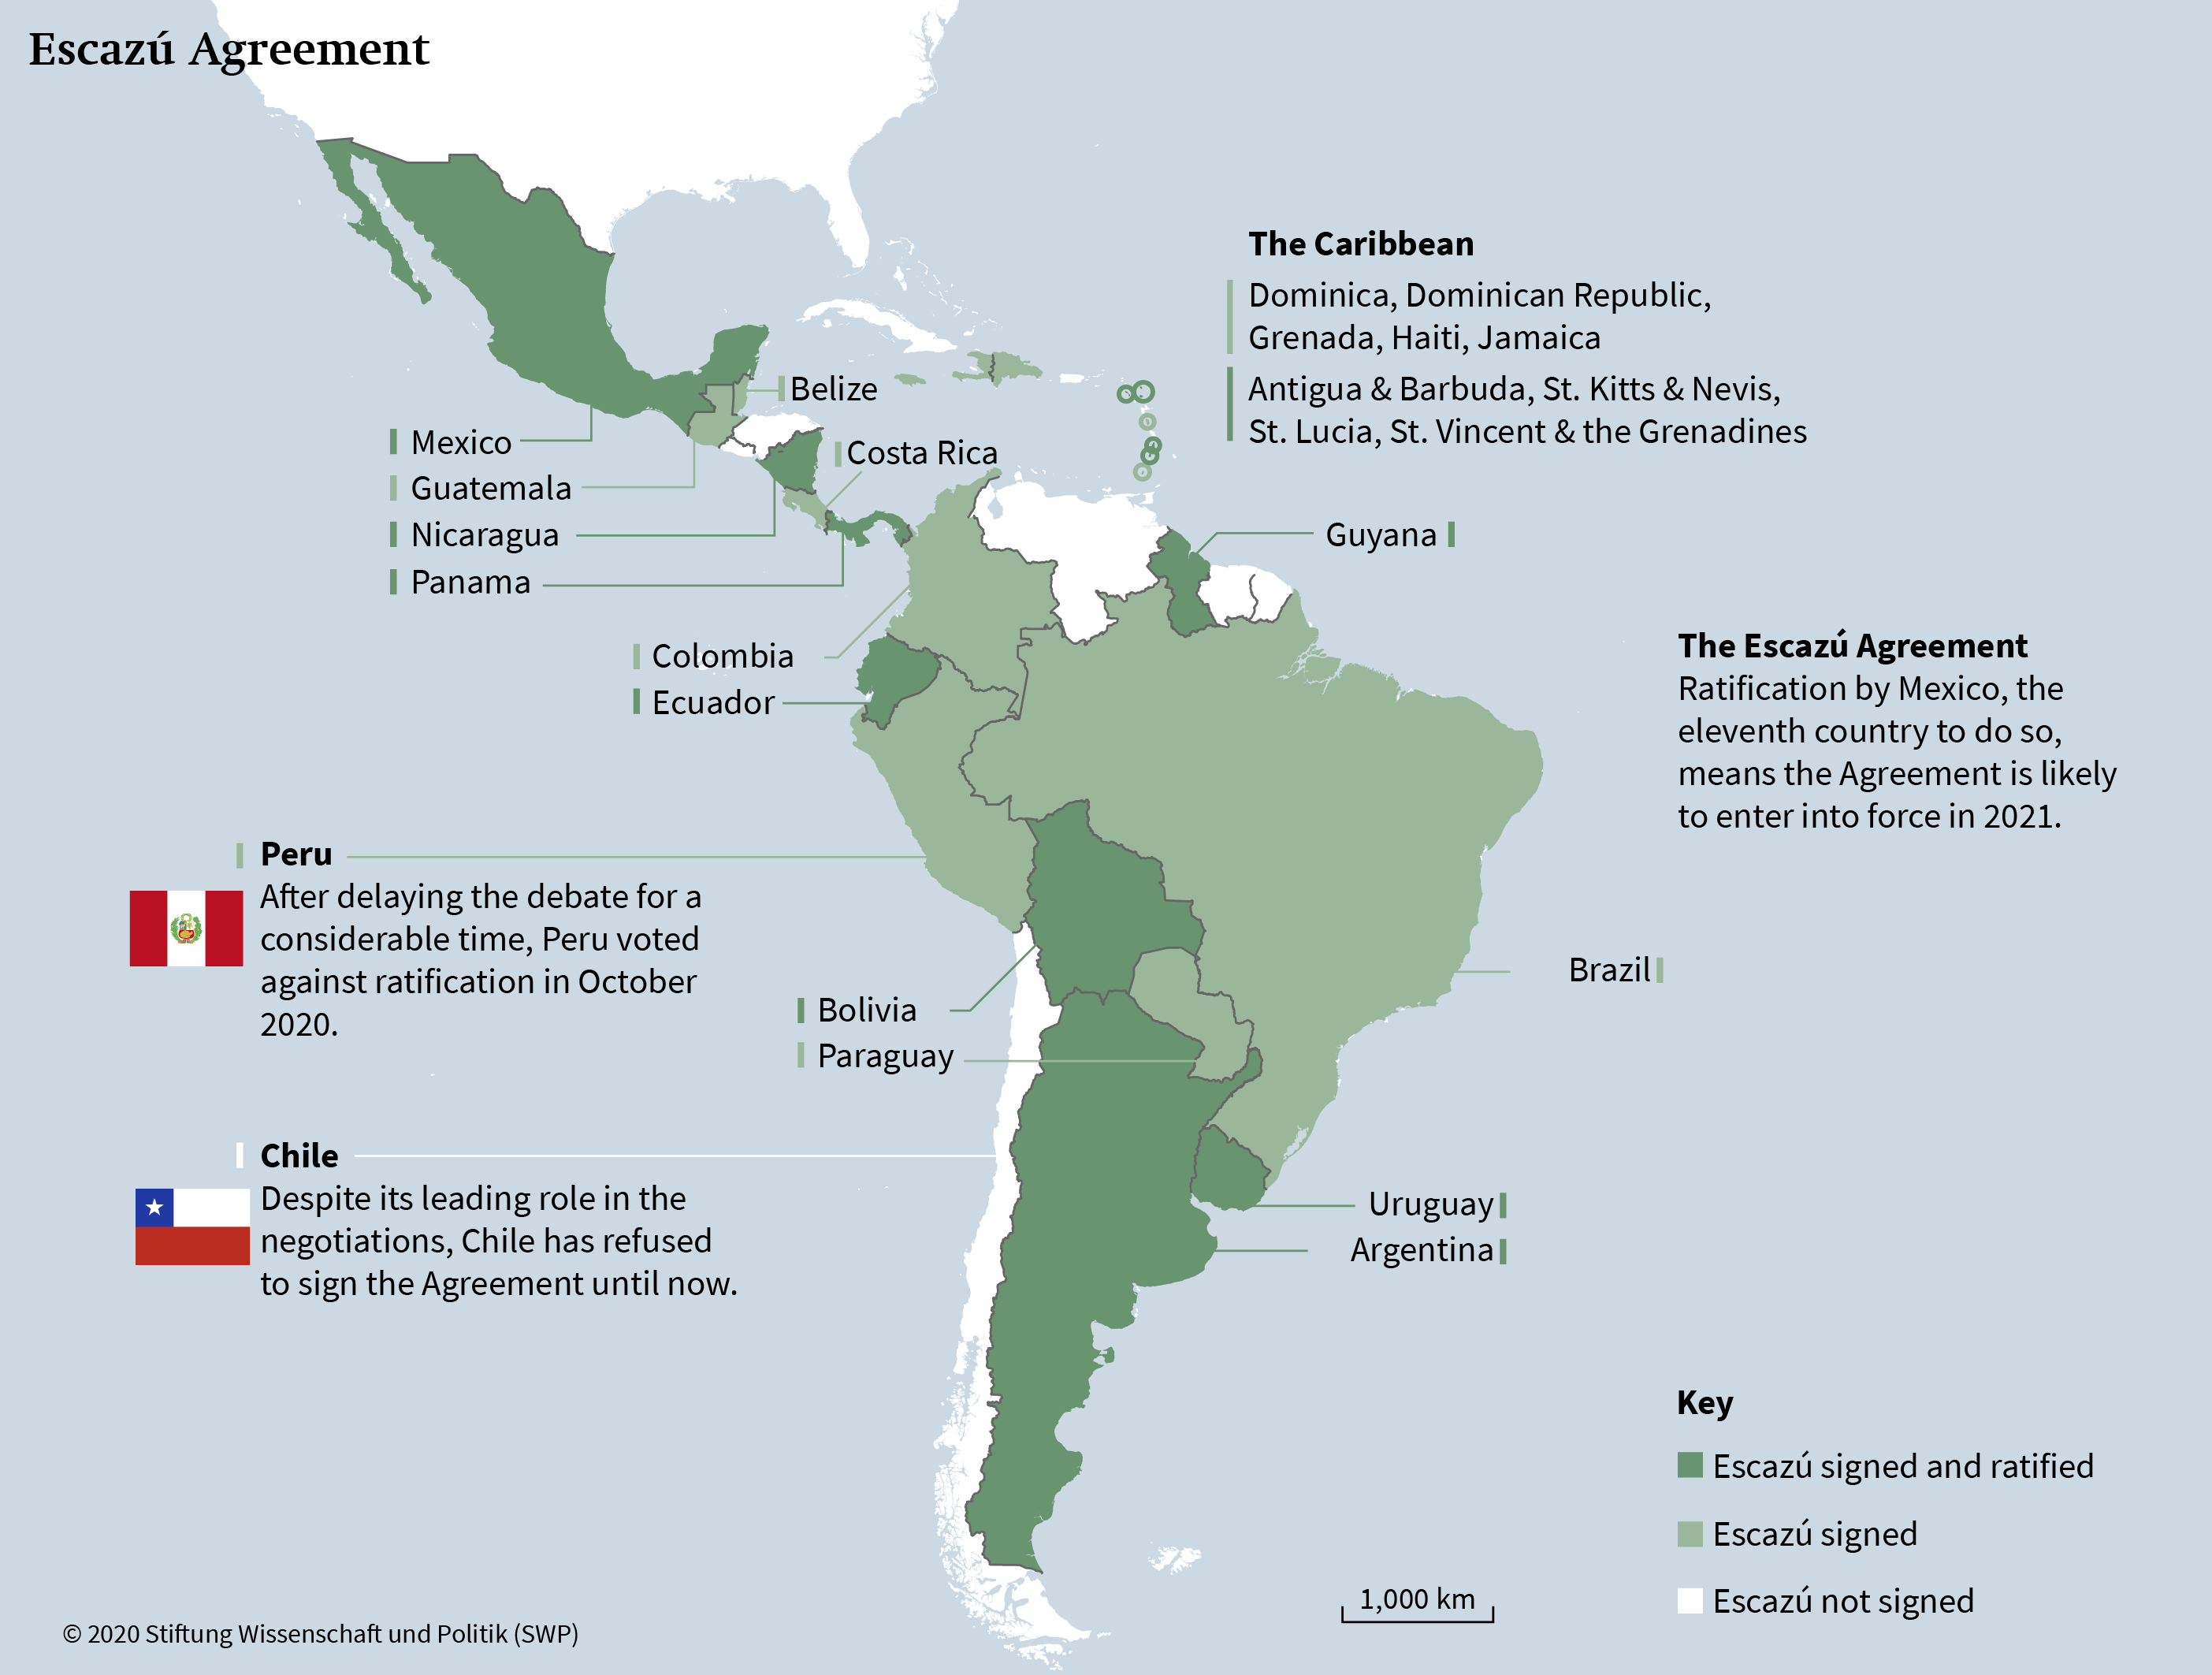 Environmental Rights and Conflicts over Raw Materials in Latin America